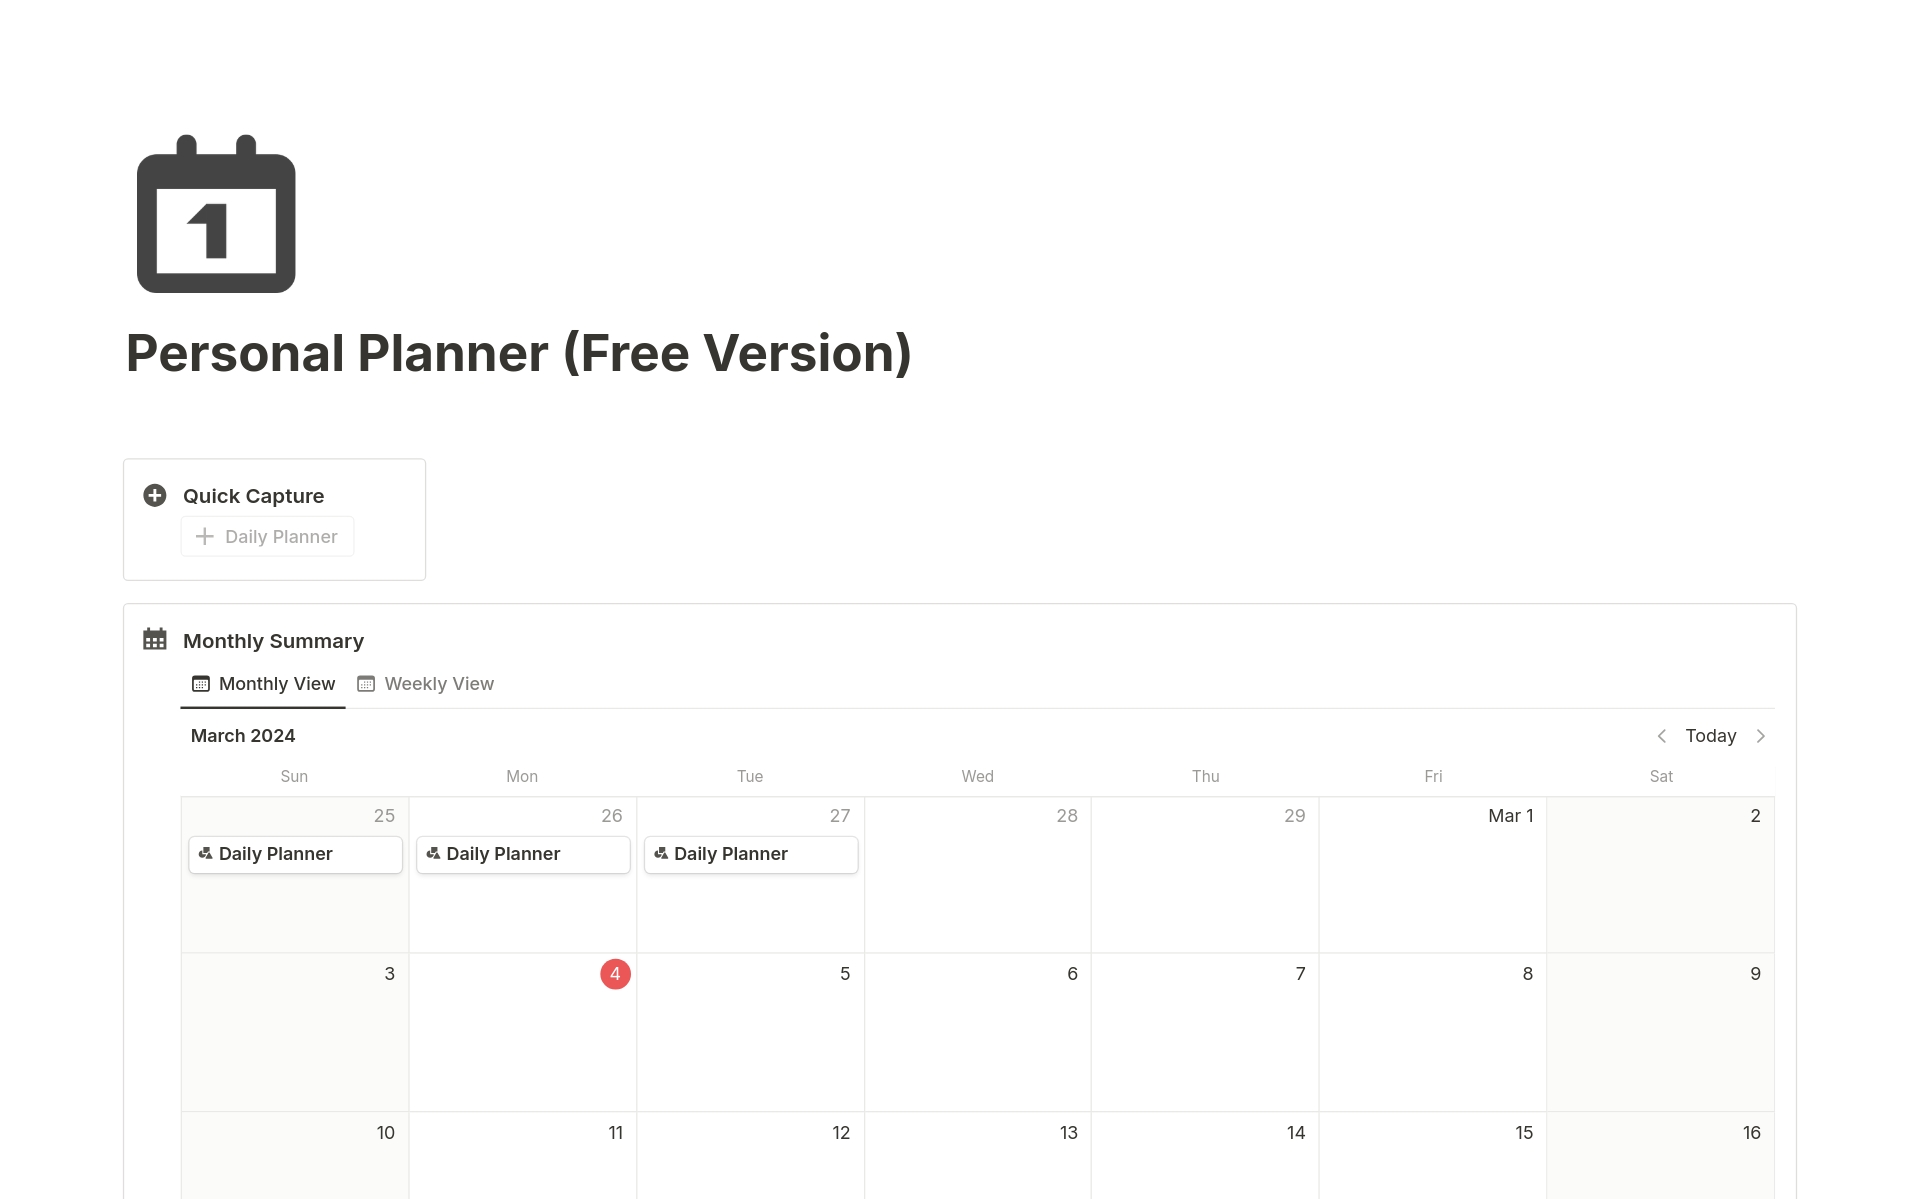 Plan your days by schedules, notes & To-dos